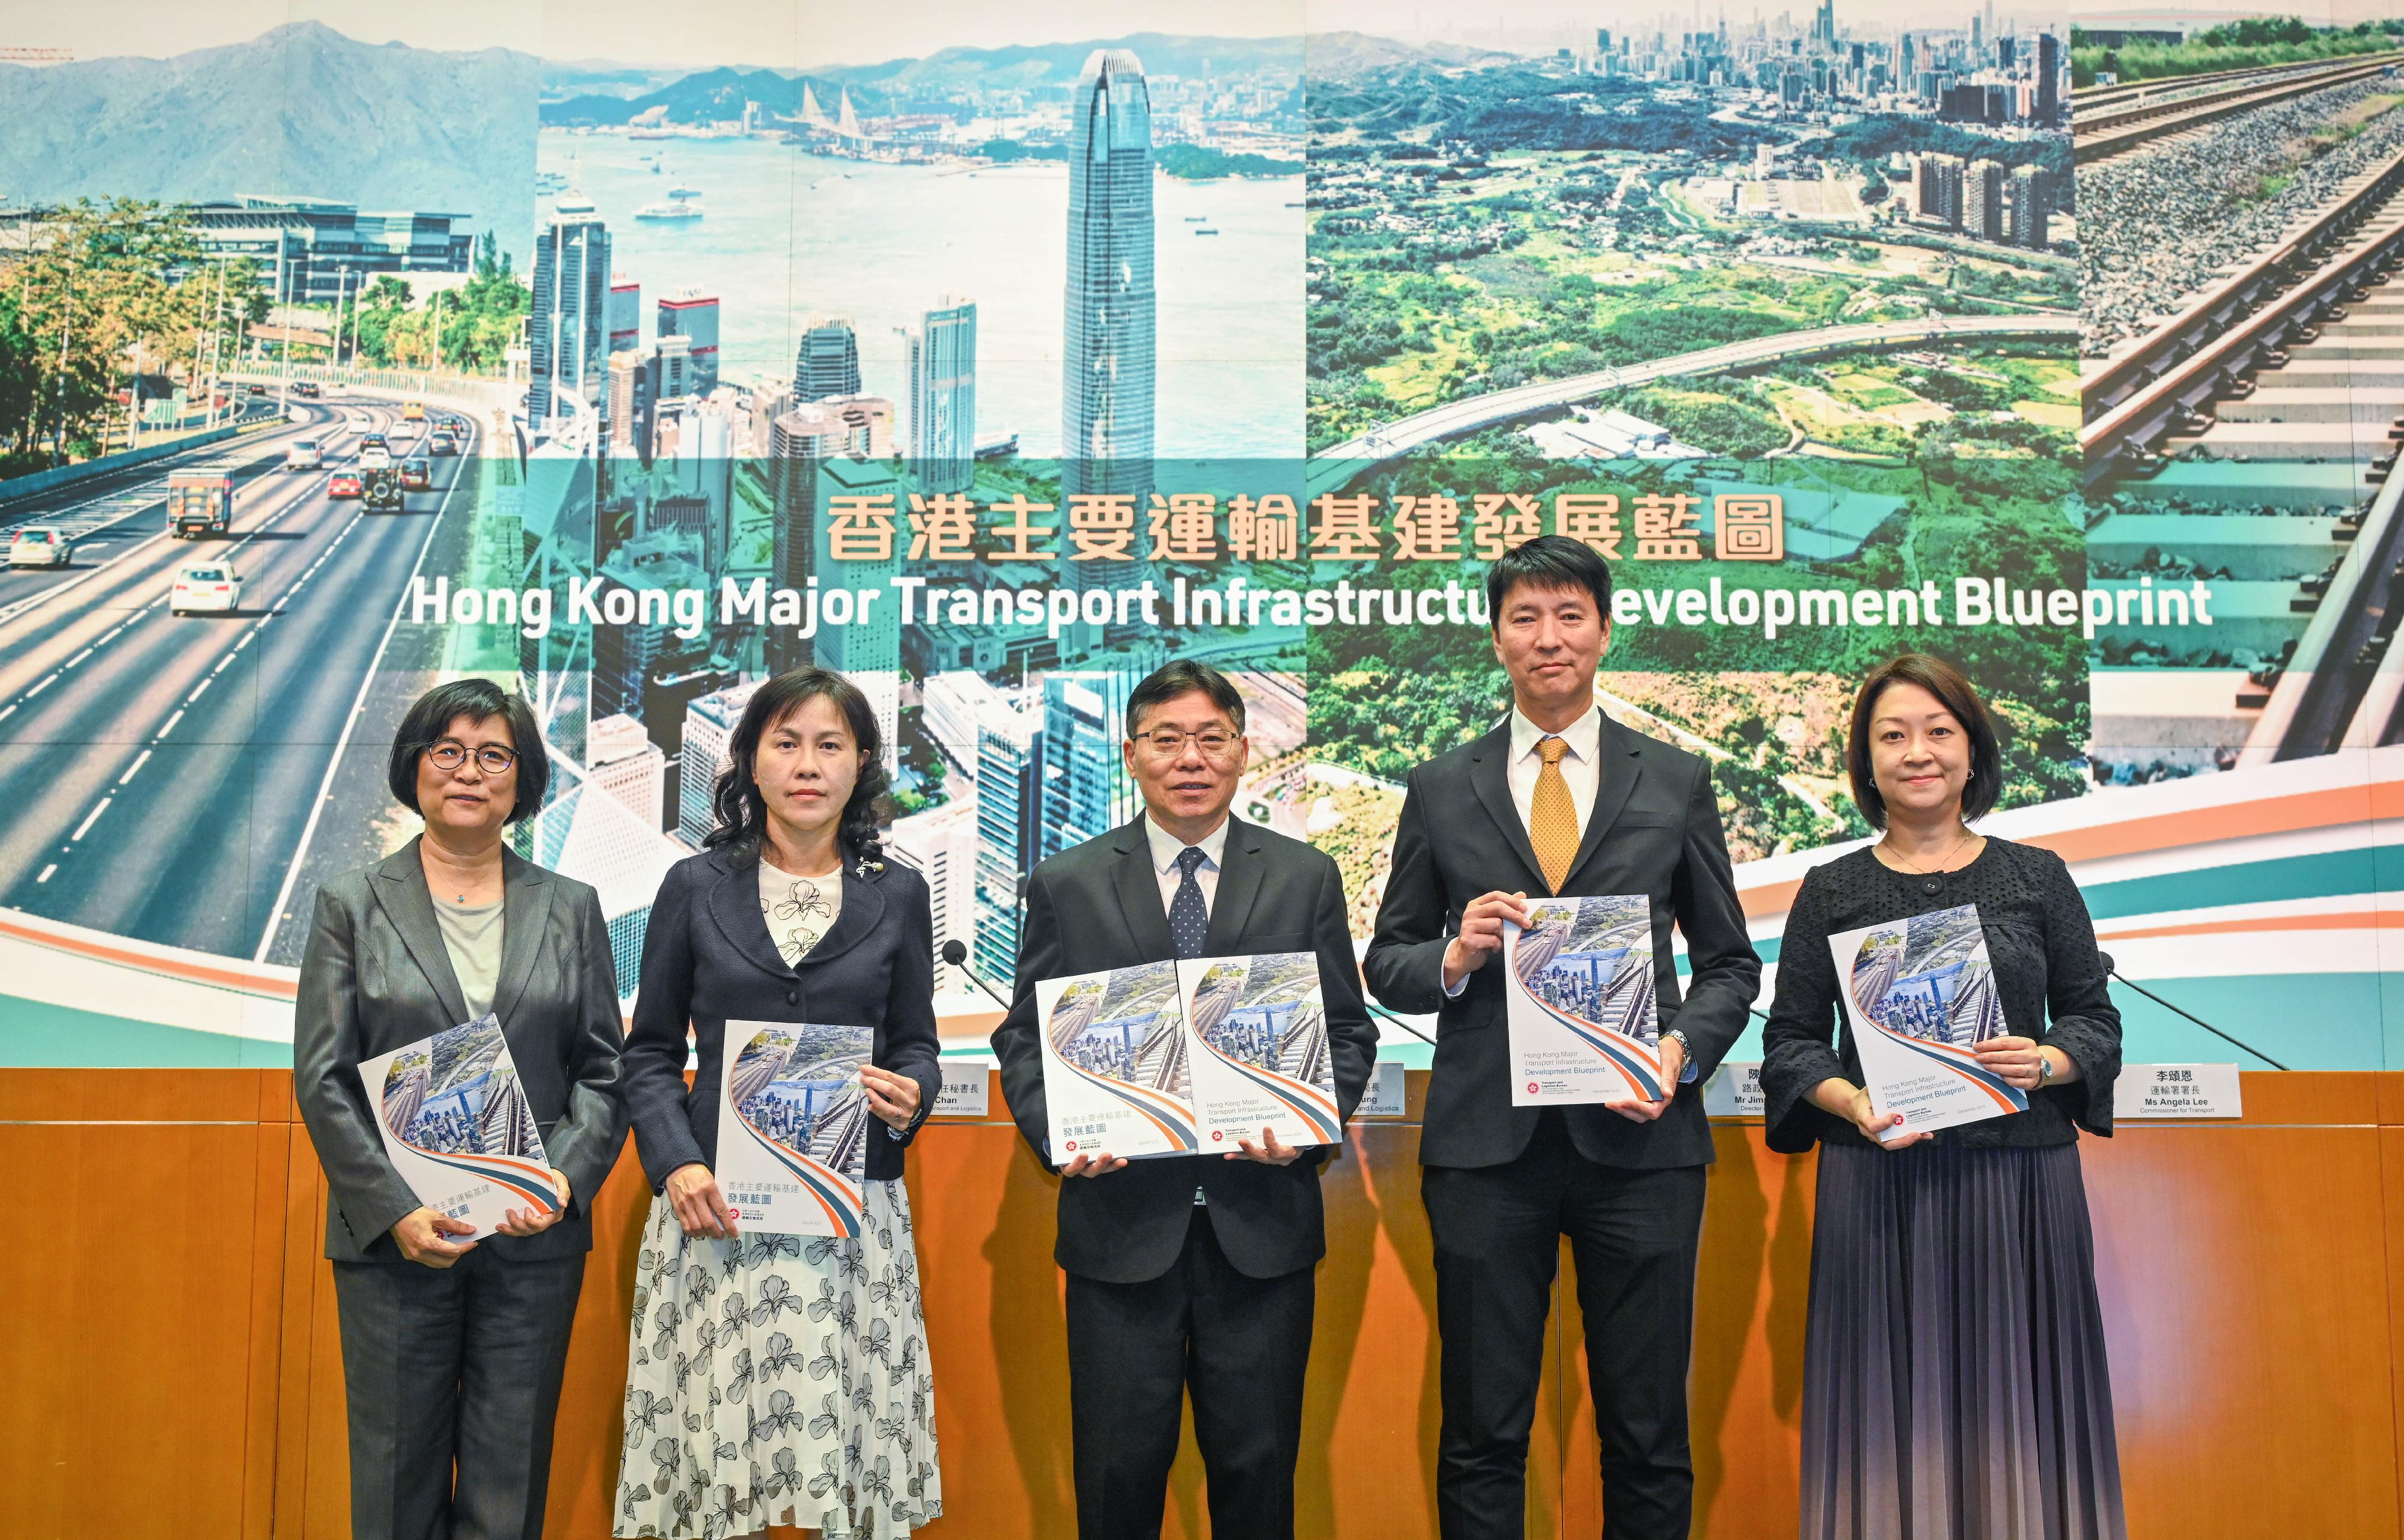 The Secretary for Transport and Logistics, Mr Lam Sai-hung, promulgated today (December 12) the Hong Kong Major Transport Infrastructure Development Blueprint to outline a forward-looking vision for strategic railway and major road networks, with a view to meeting Hong Kong's long-term transport and logistics demand up to 2046 and beyond. Photo shows Mr Lam (centre); the Permanent Secretary for Transport and Logistics, Ms Mable Chan (second left); the Director of Highways, Mr Jimmy Chan (second right); the Commissioner for Transport, Ms Angela Lee (first right); and Deputy Secretary for Transport and Logistics Ms Amy Wong (first left) at the press conference.